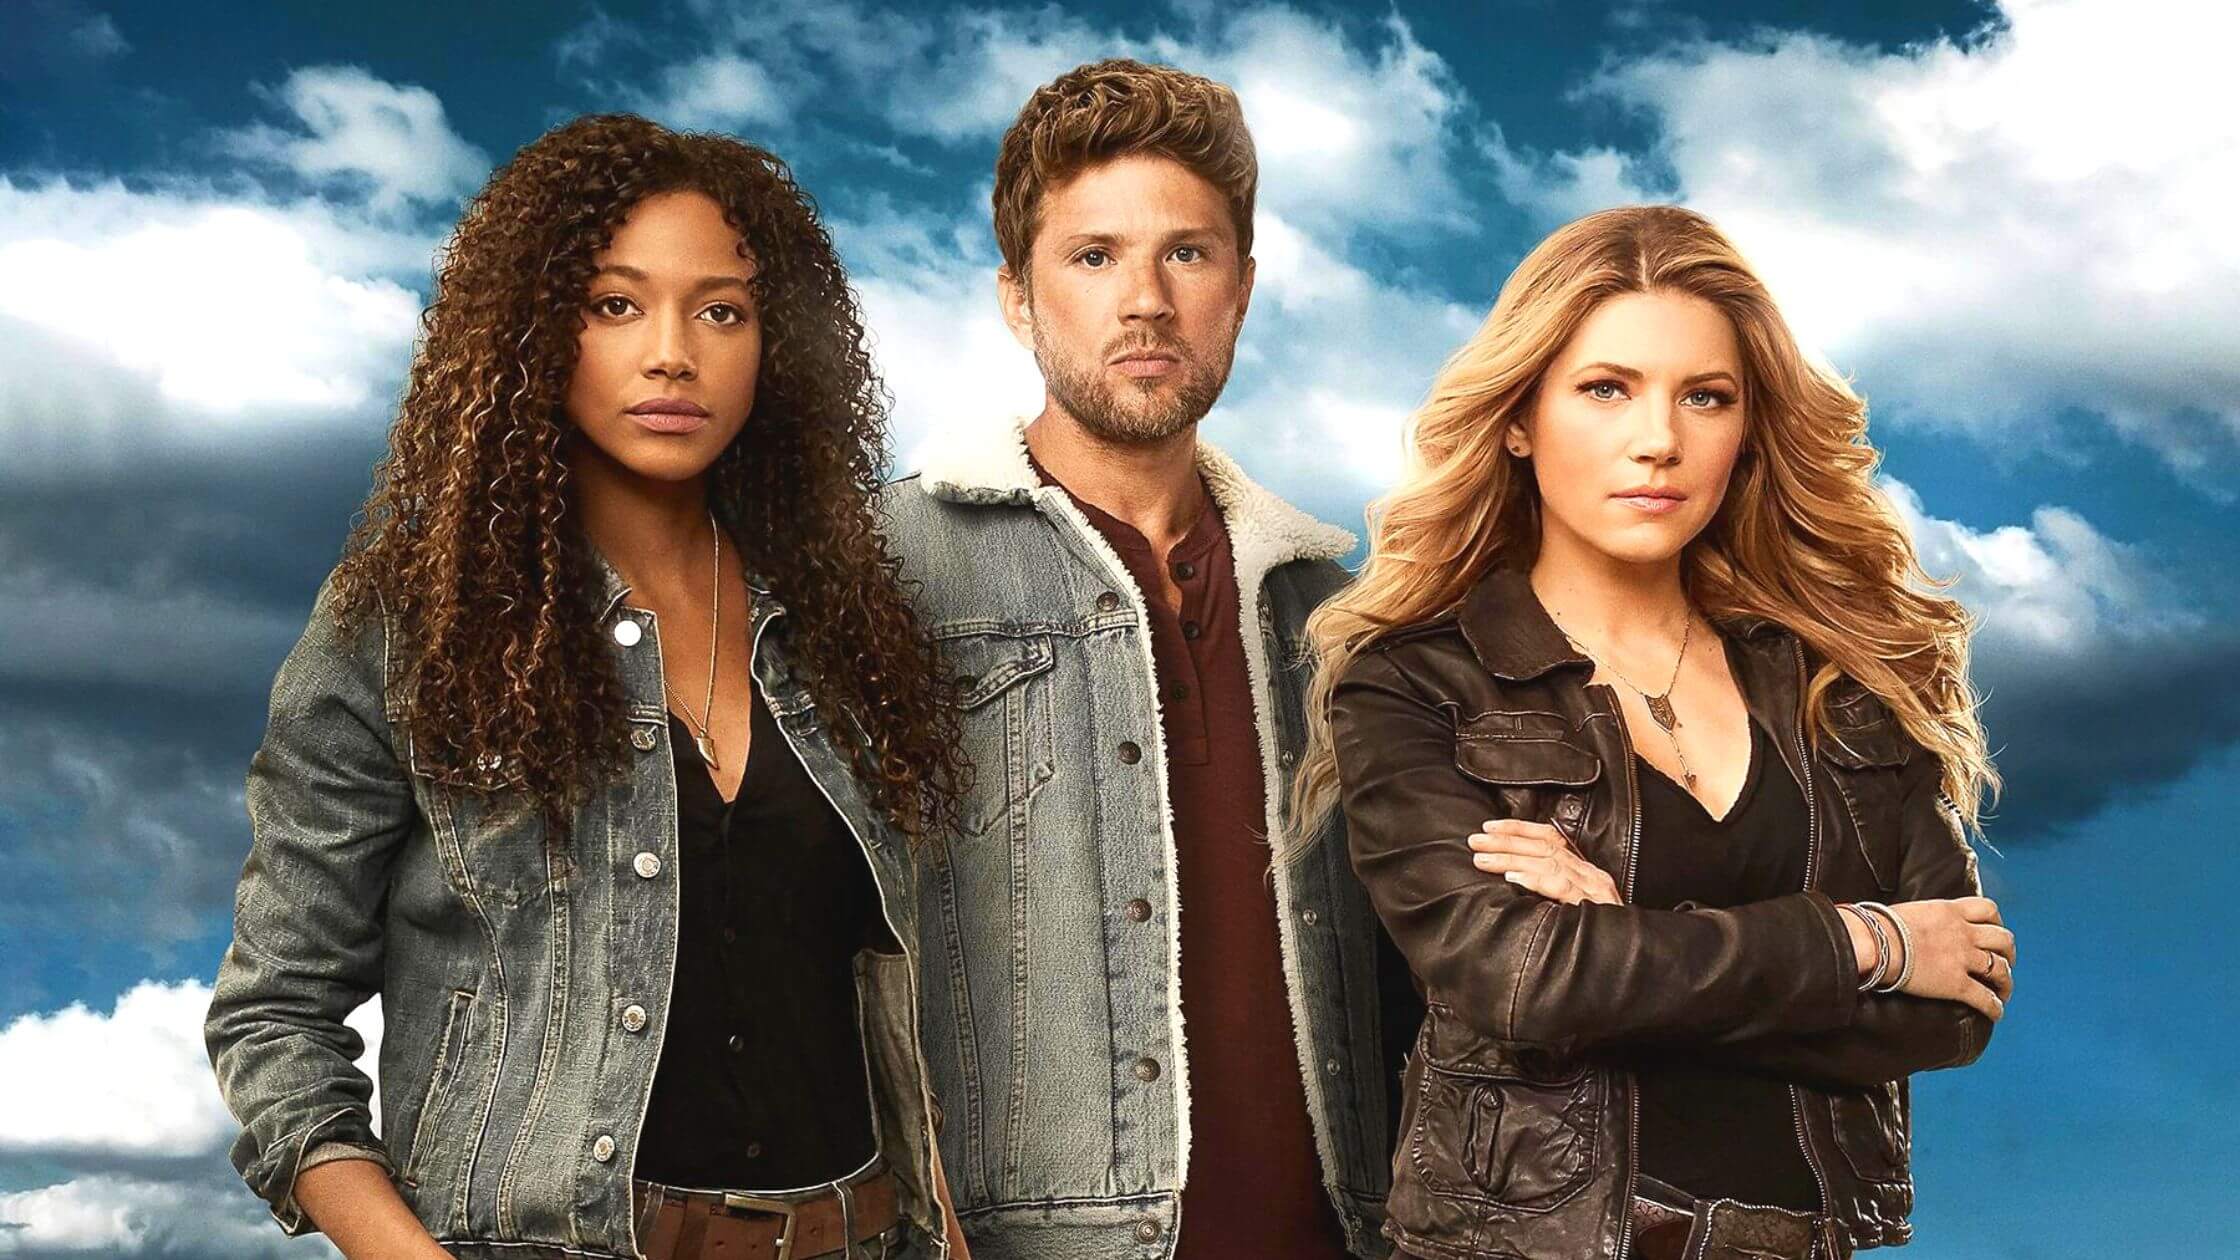 Big Sky season 3, What Is The Release Date